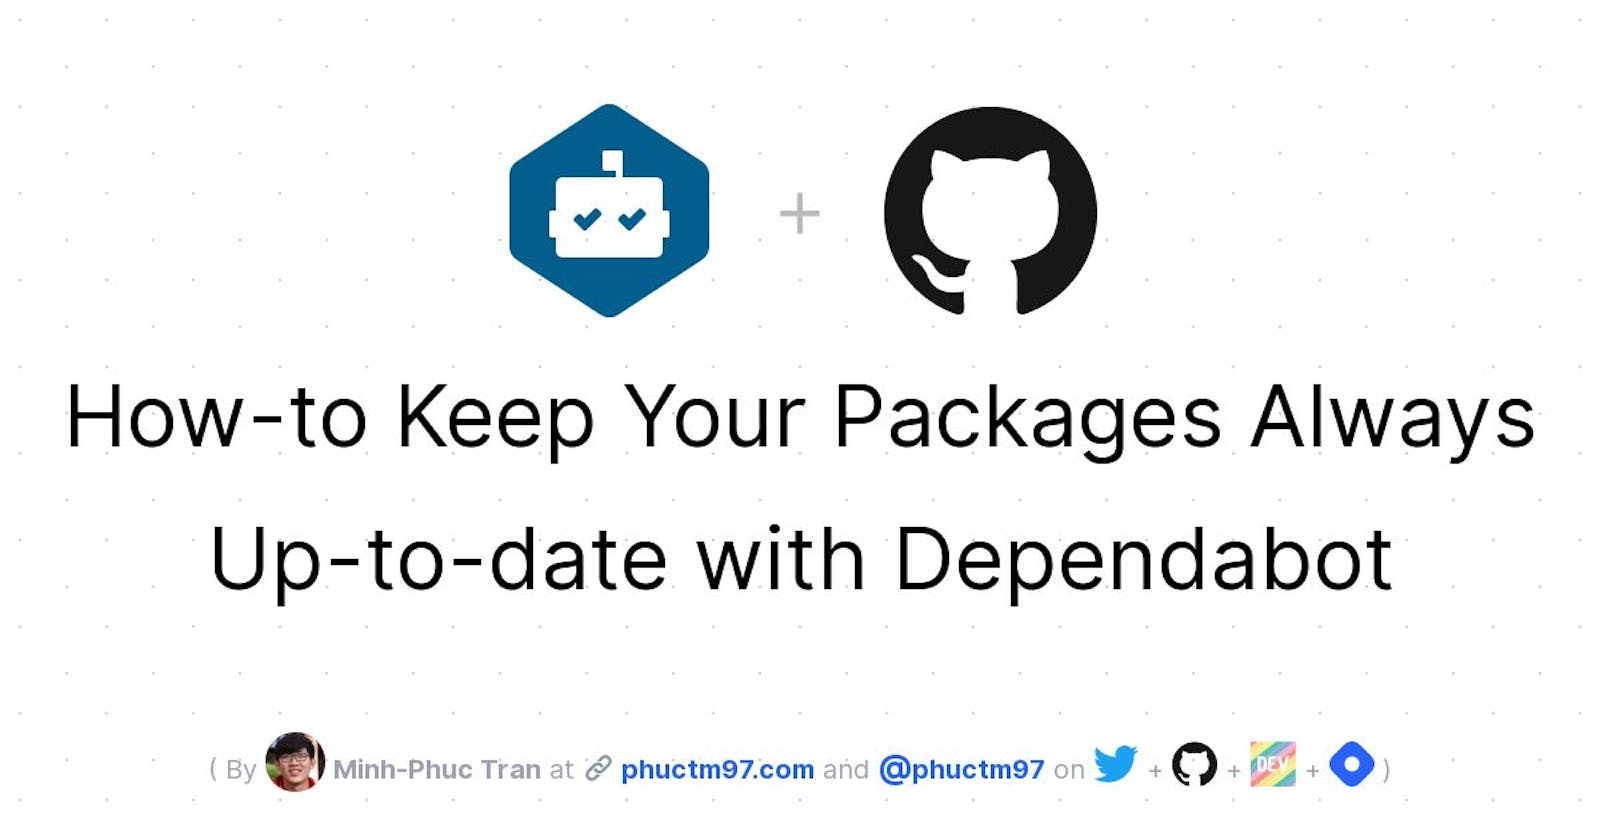 How-to Keep Your Packages Always Up-to-date with Dependabot